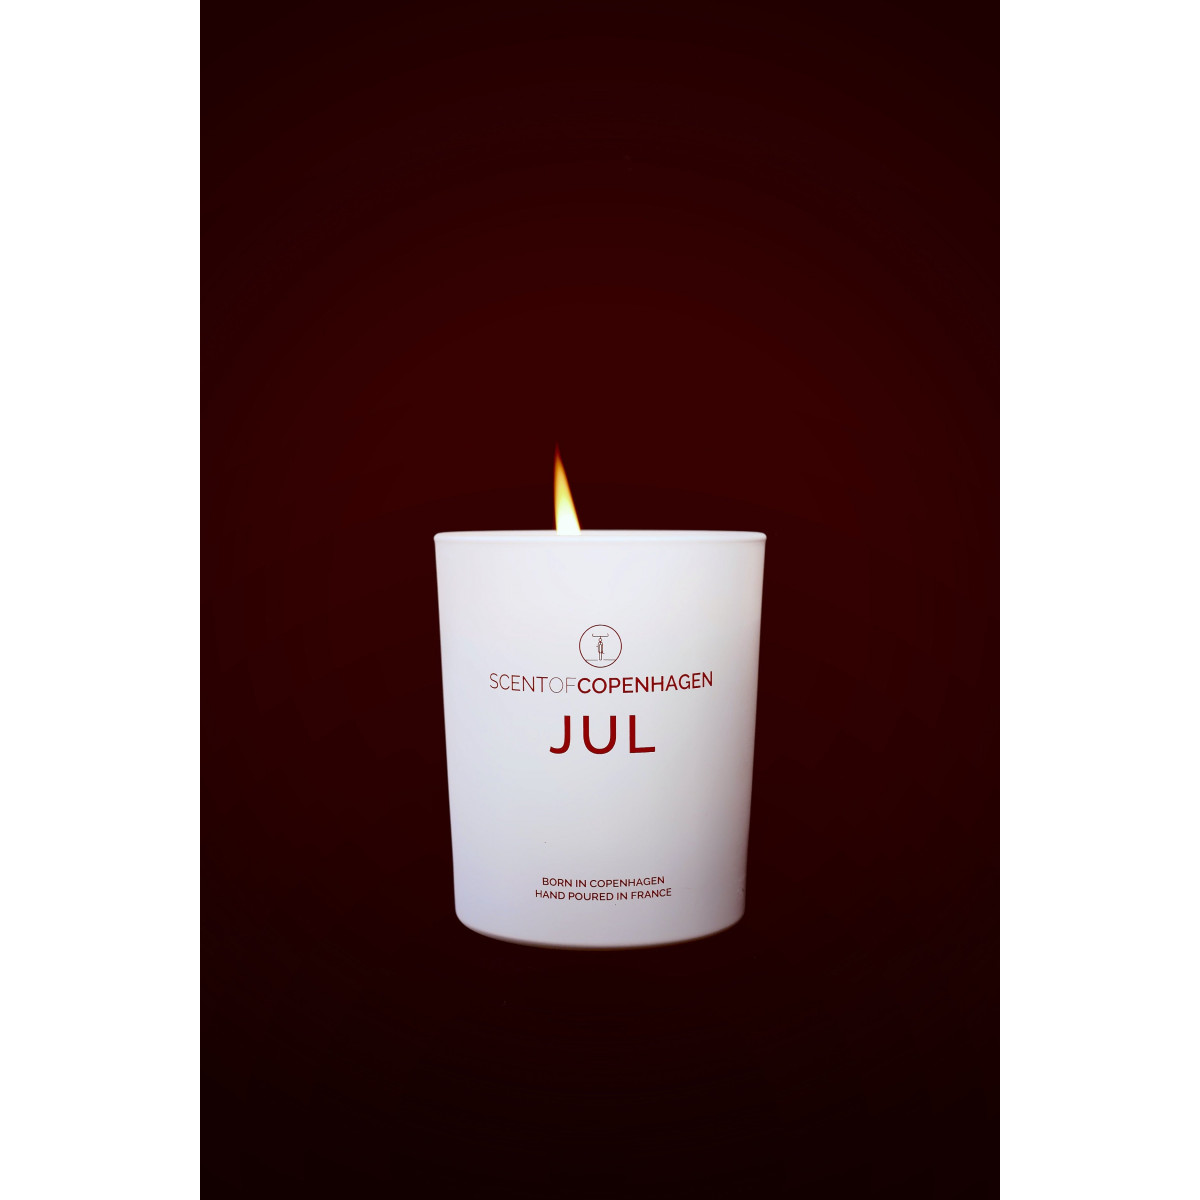 Christmas candle limited edition - JUL